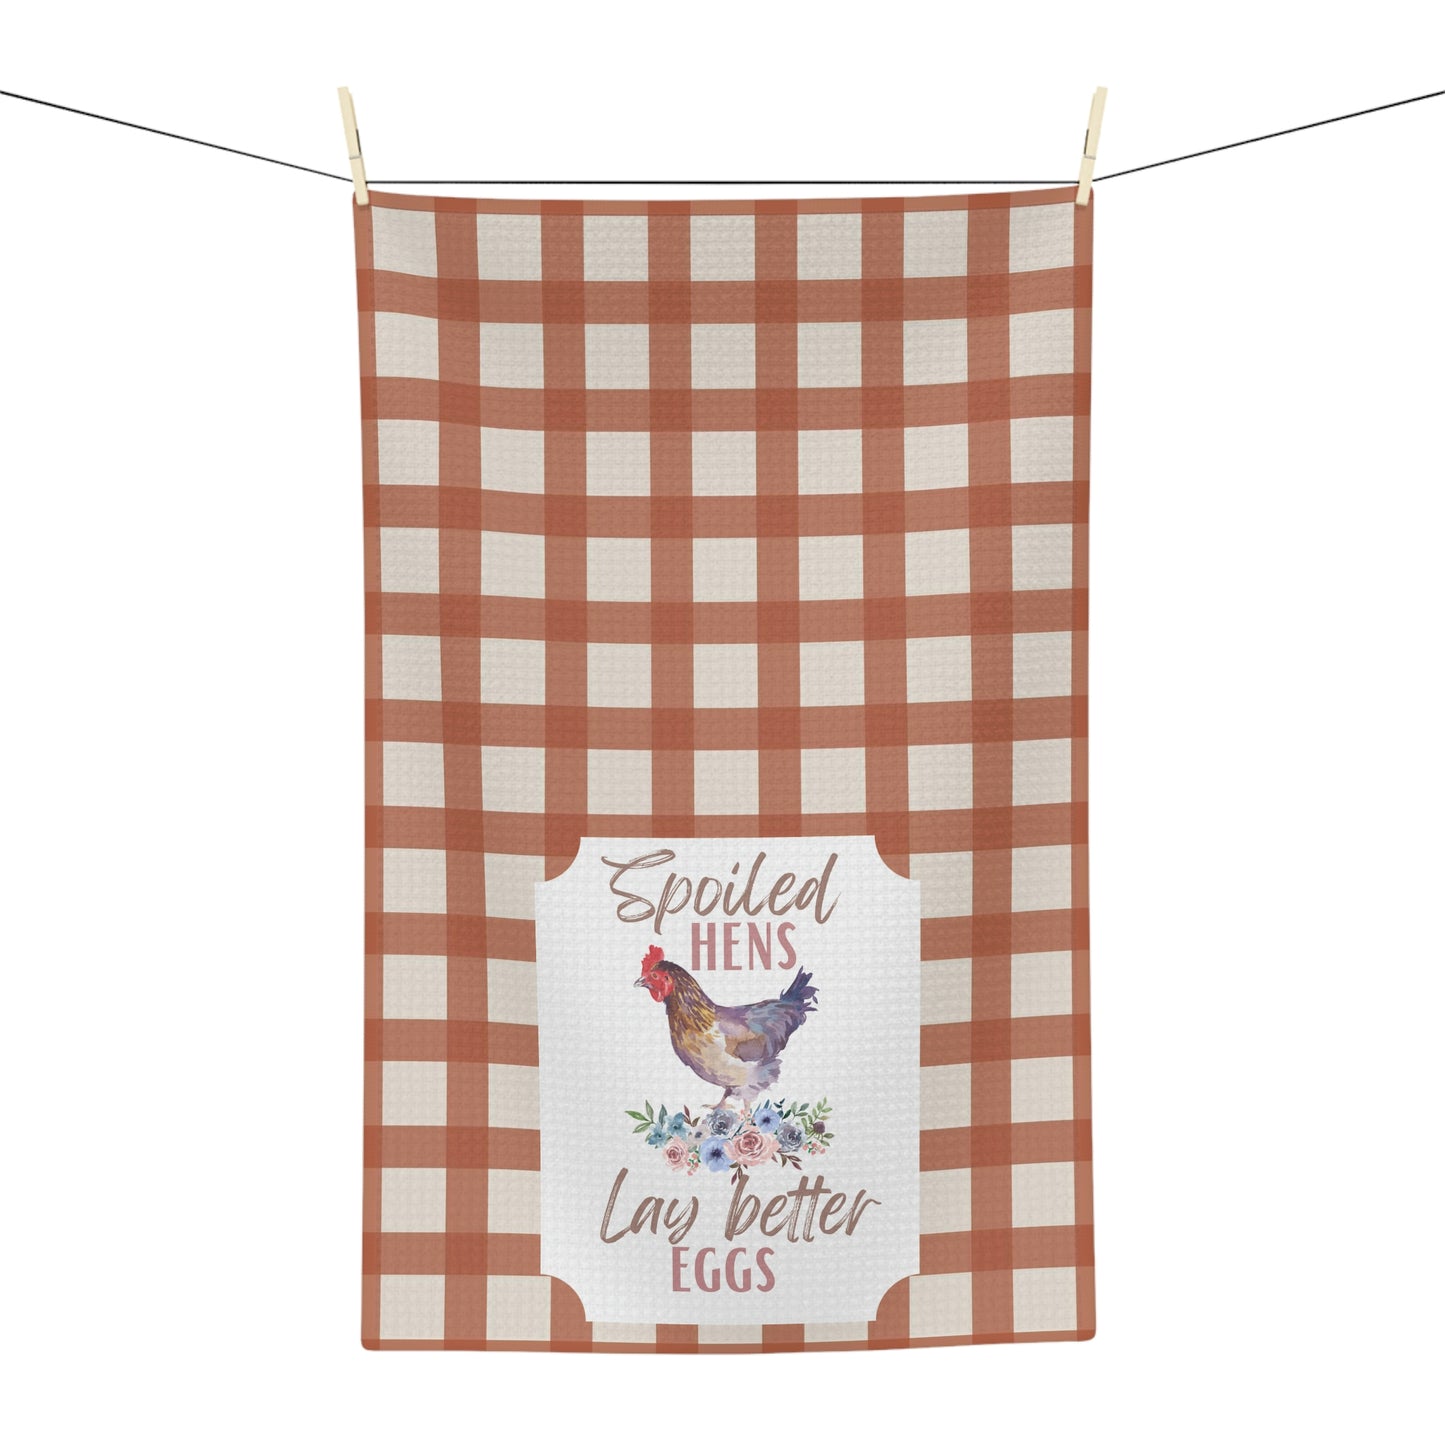 Spoiled Chickens Tea Towel